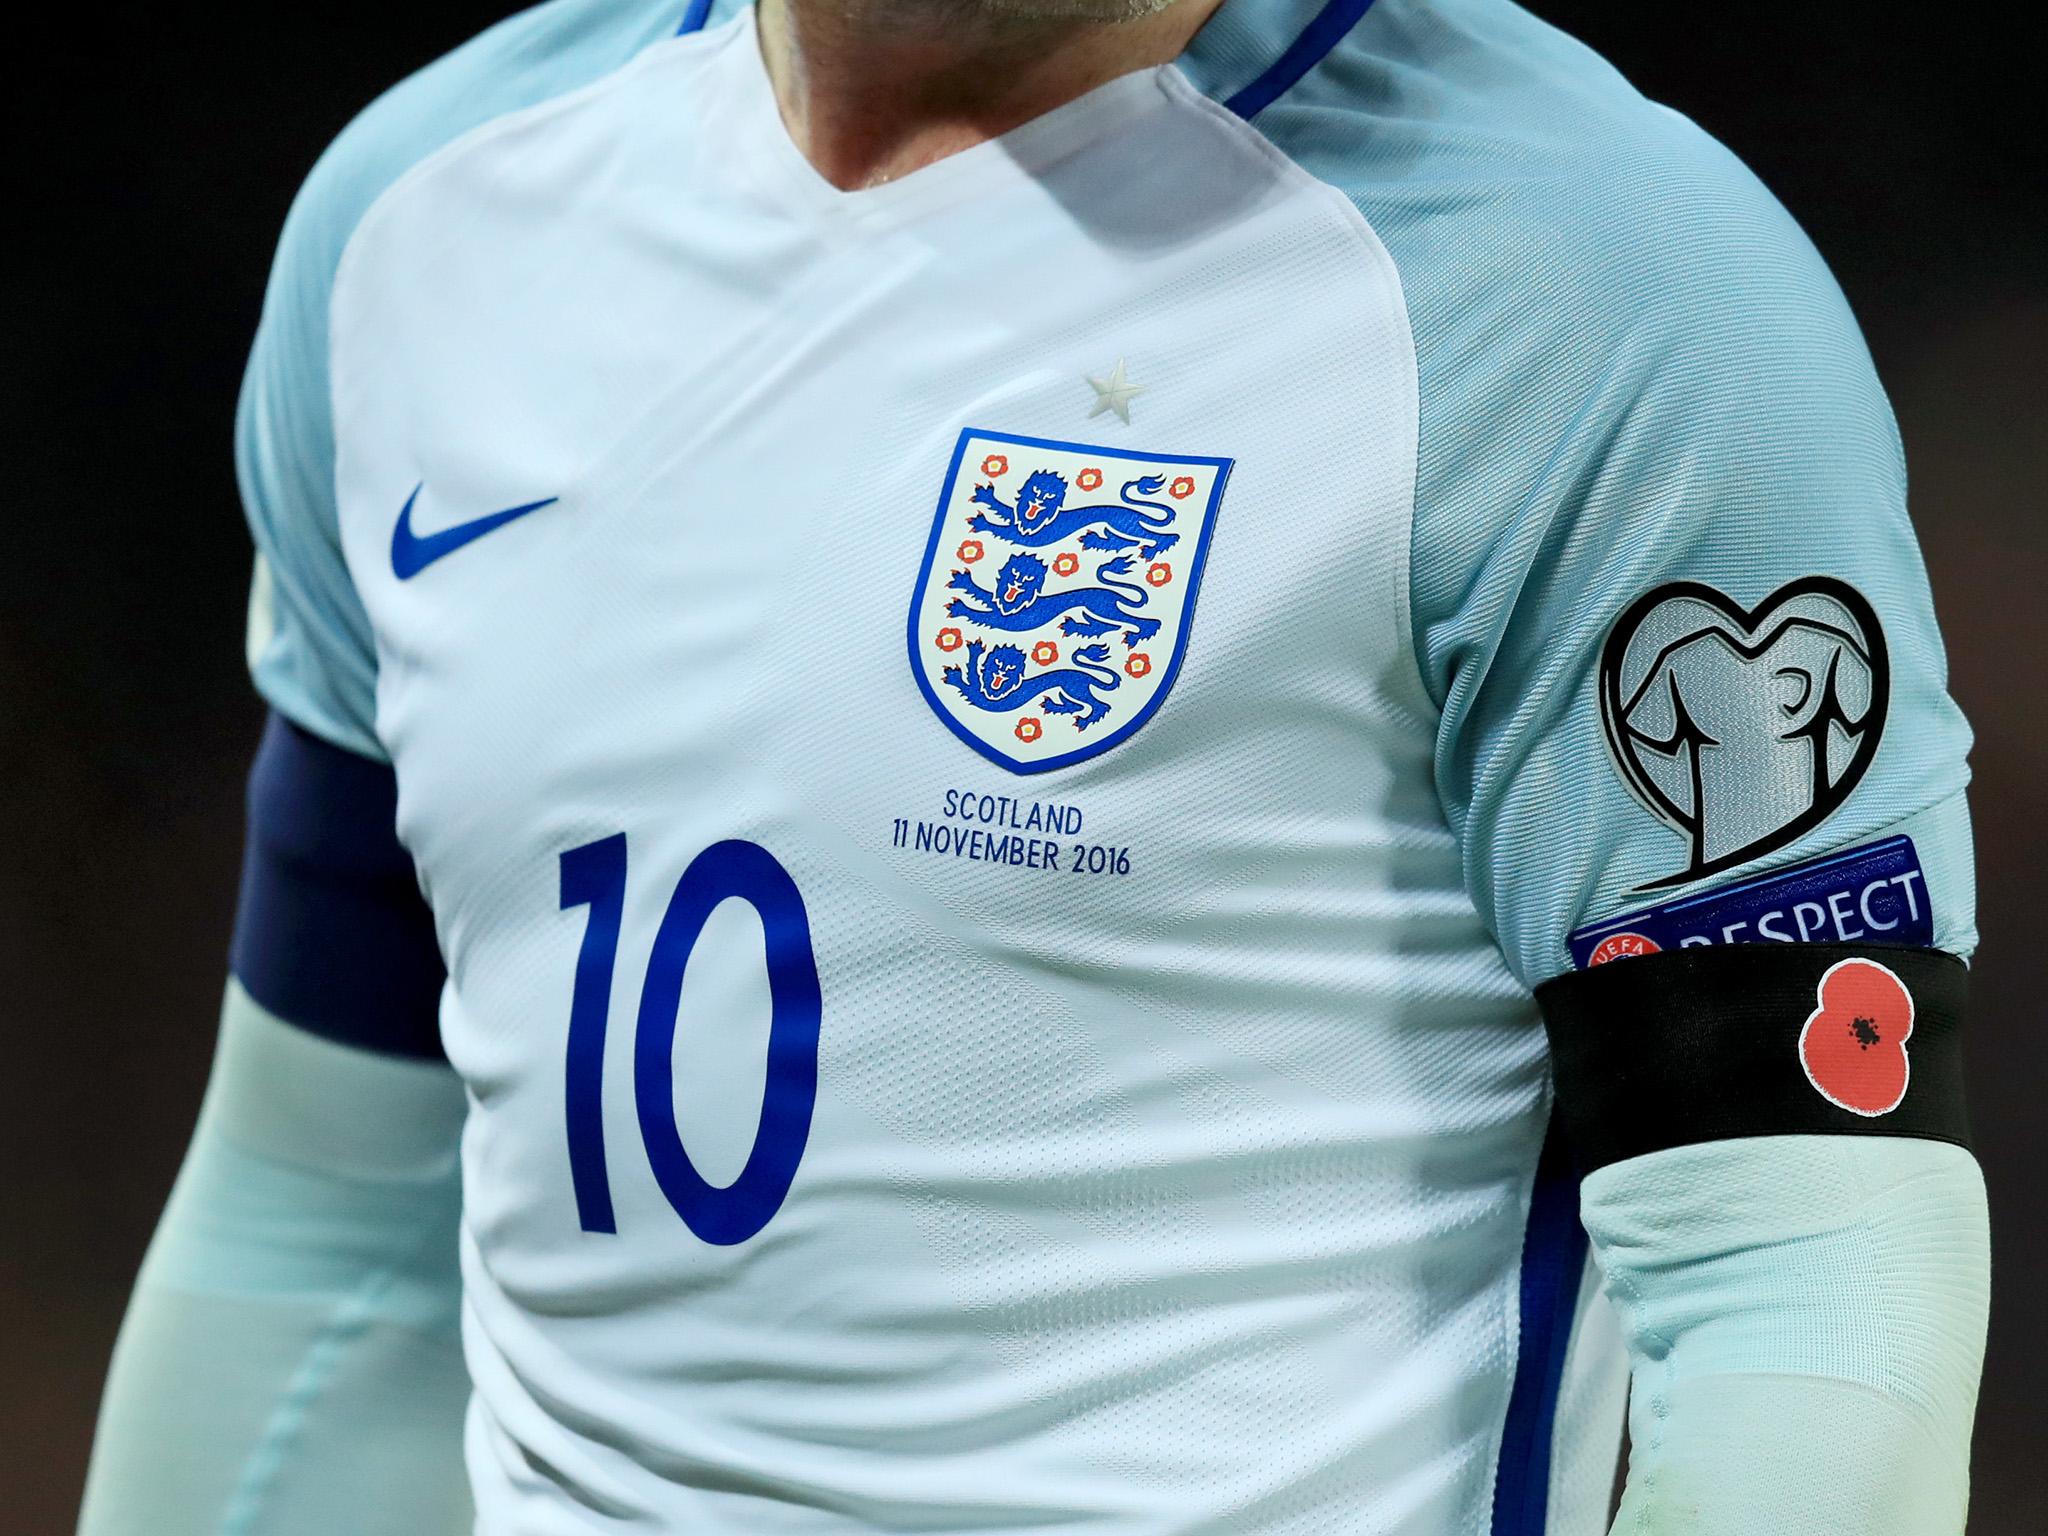 England, or any other team, will now be able to wear poppies on their shirts providing they get their opponent’s permission and inform the organisers of the match